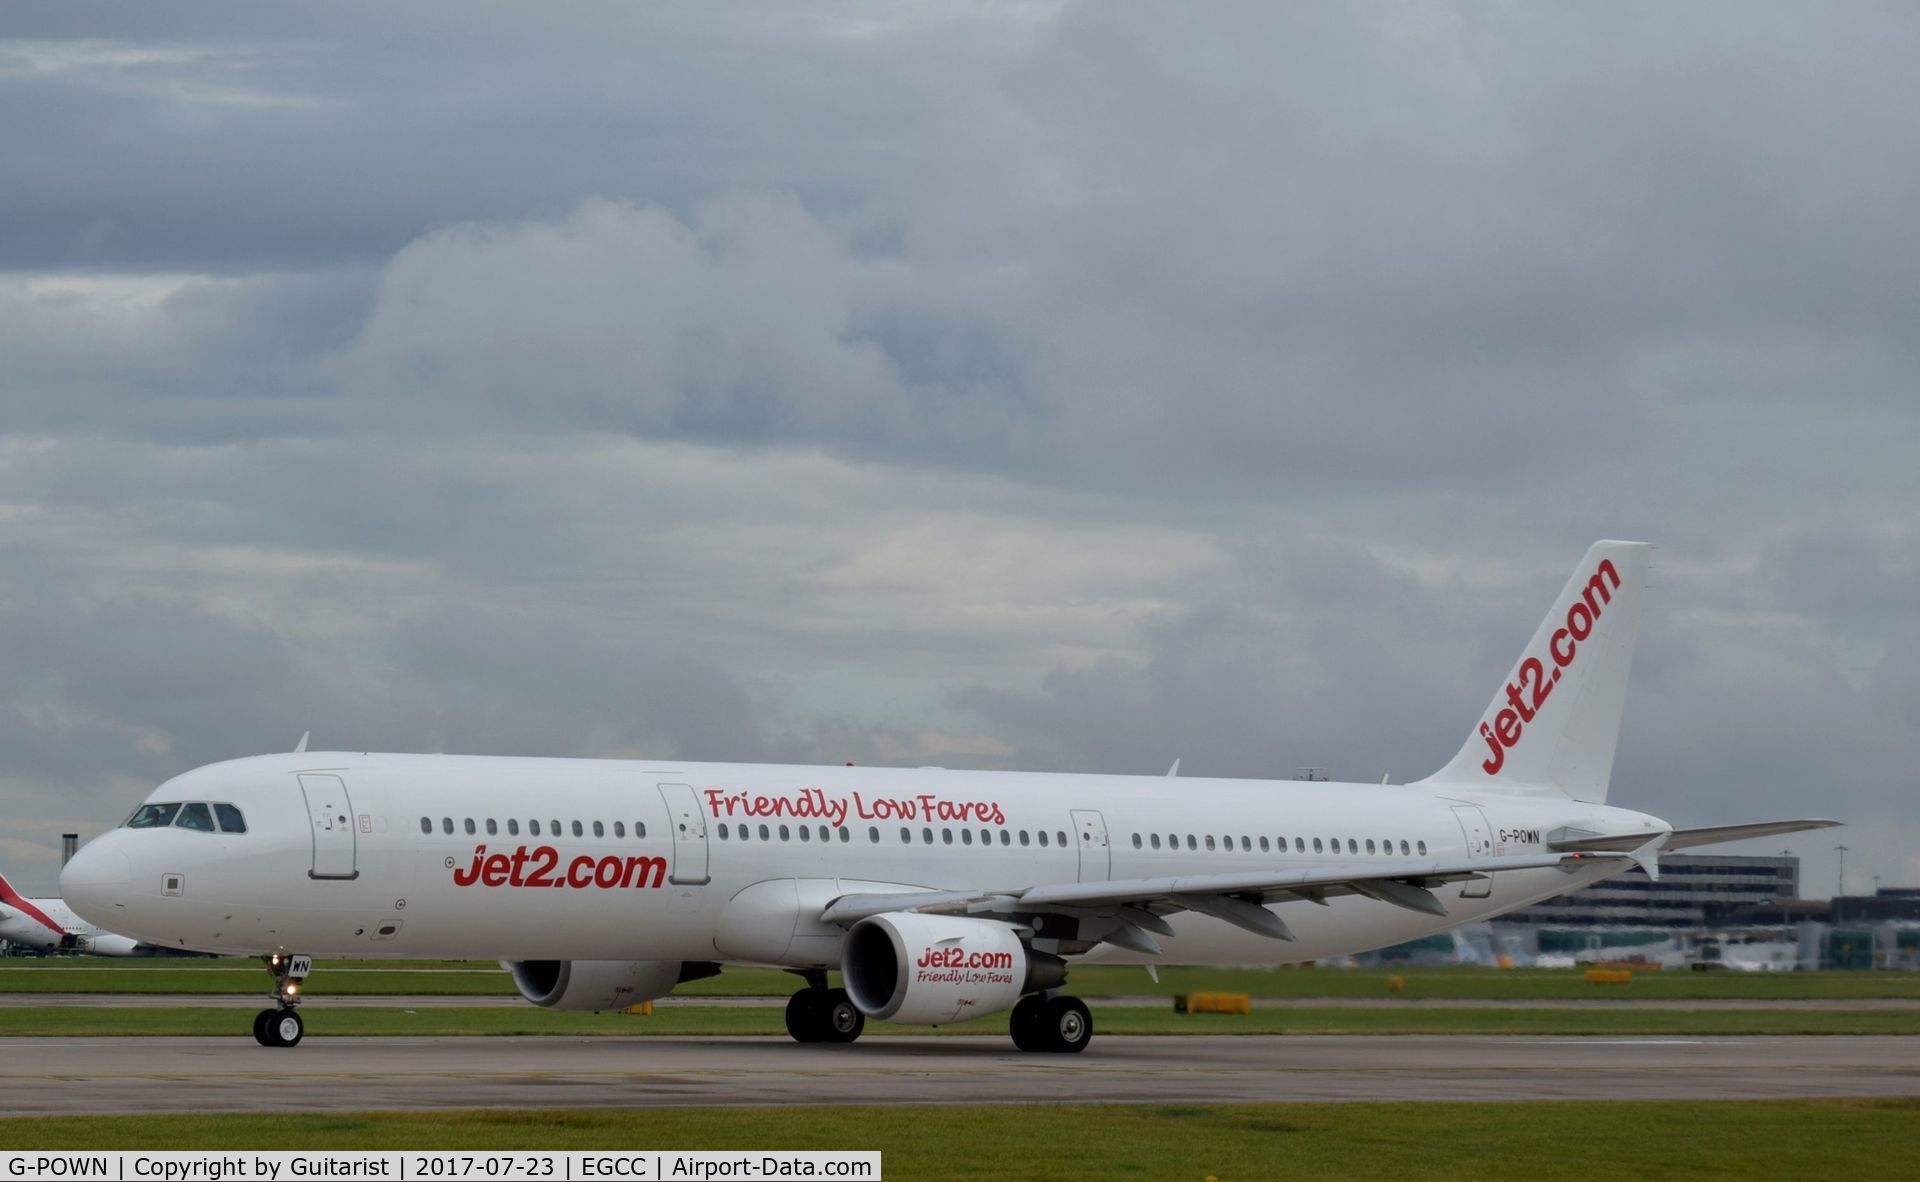 G-POWN, 2009 Airbus A321-211 C/N 3830, At Manchester